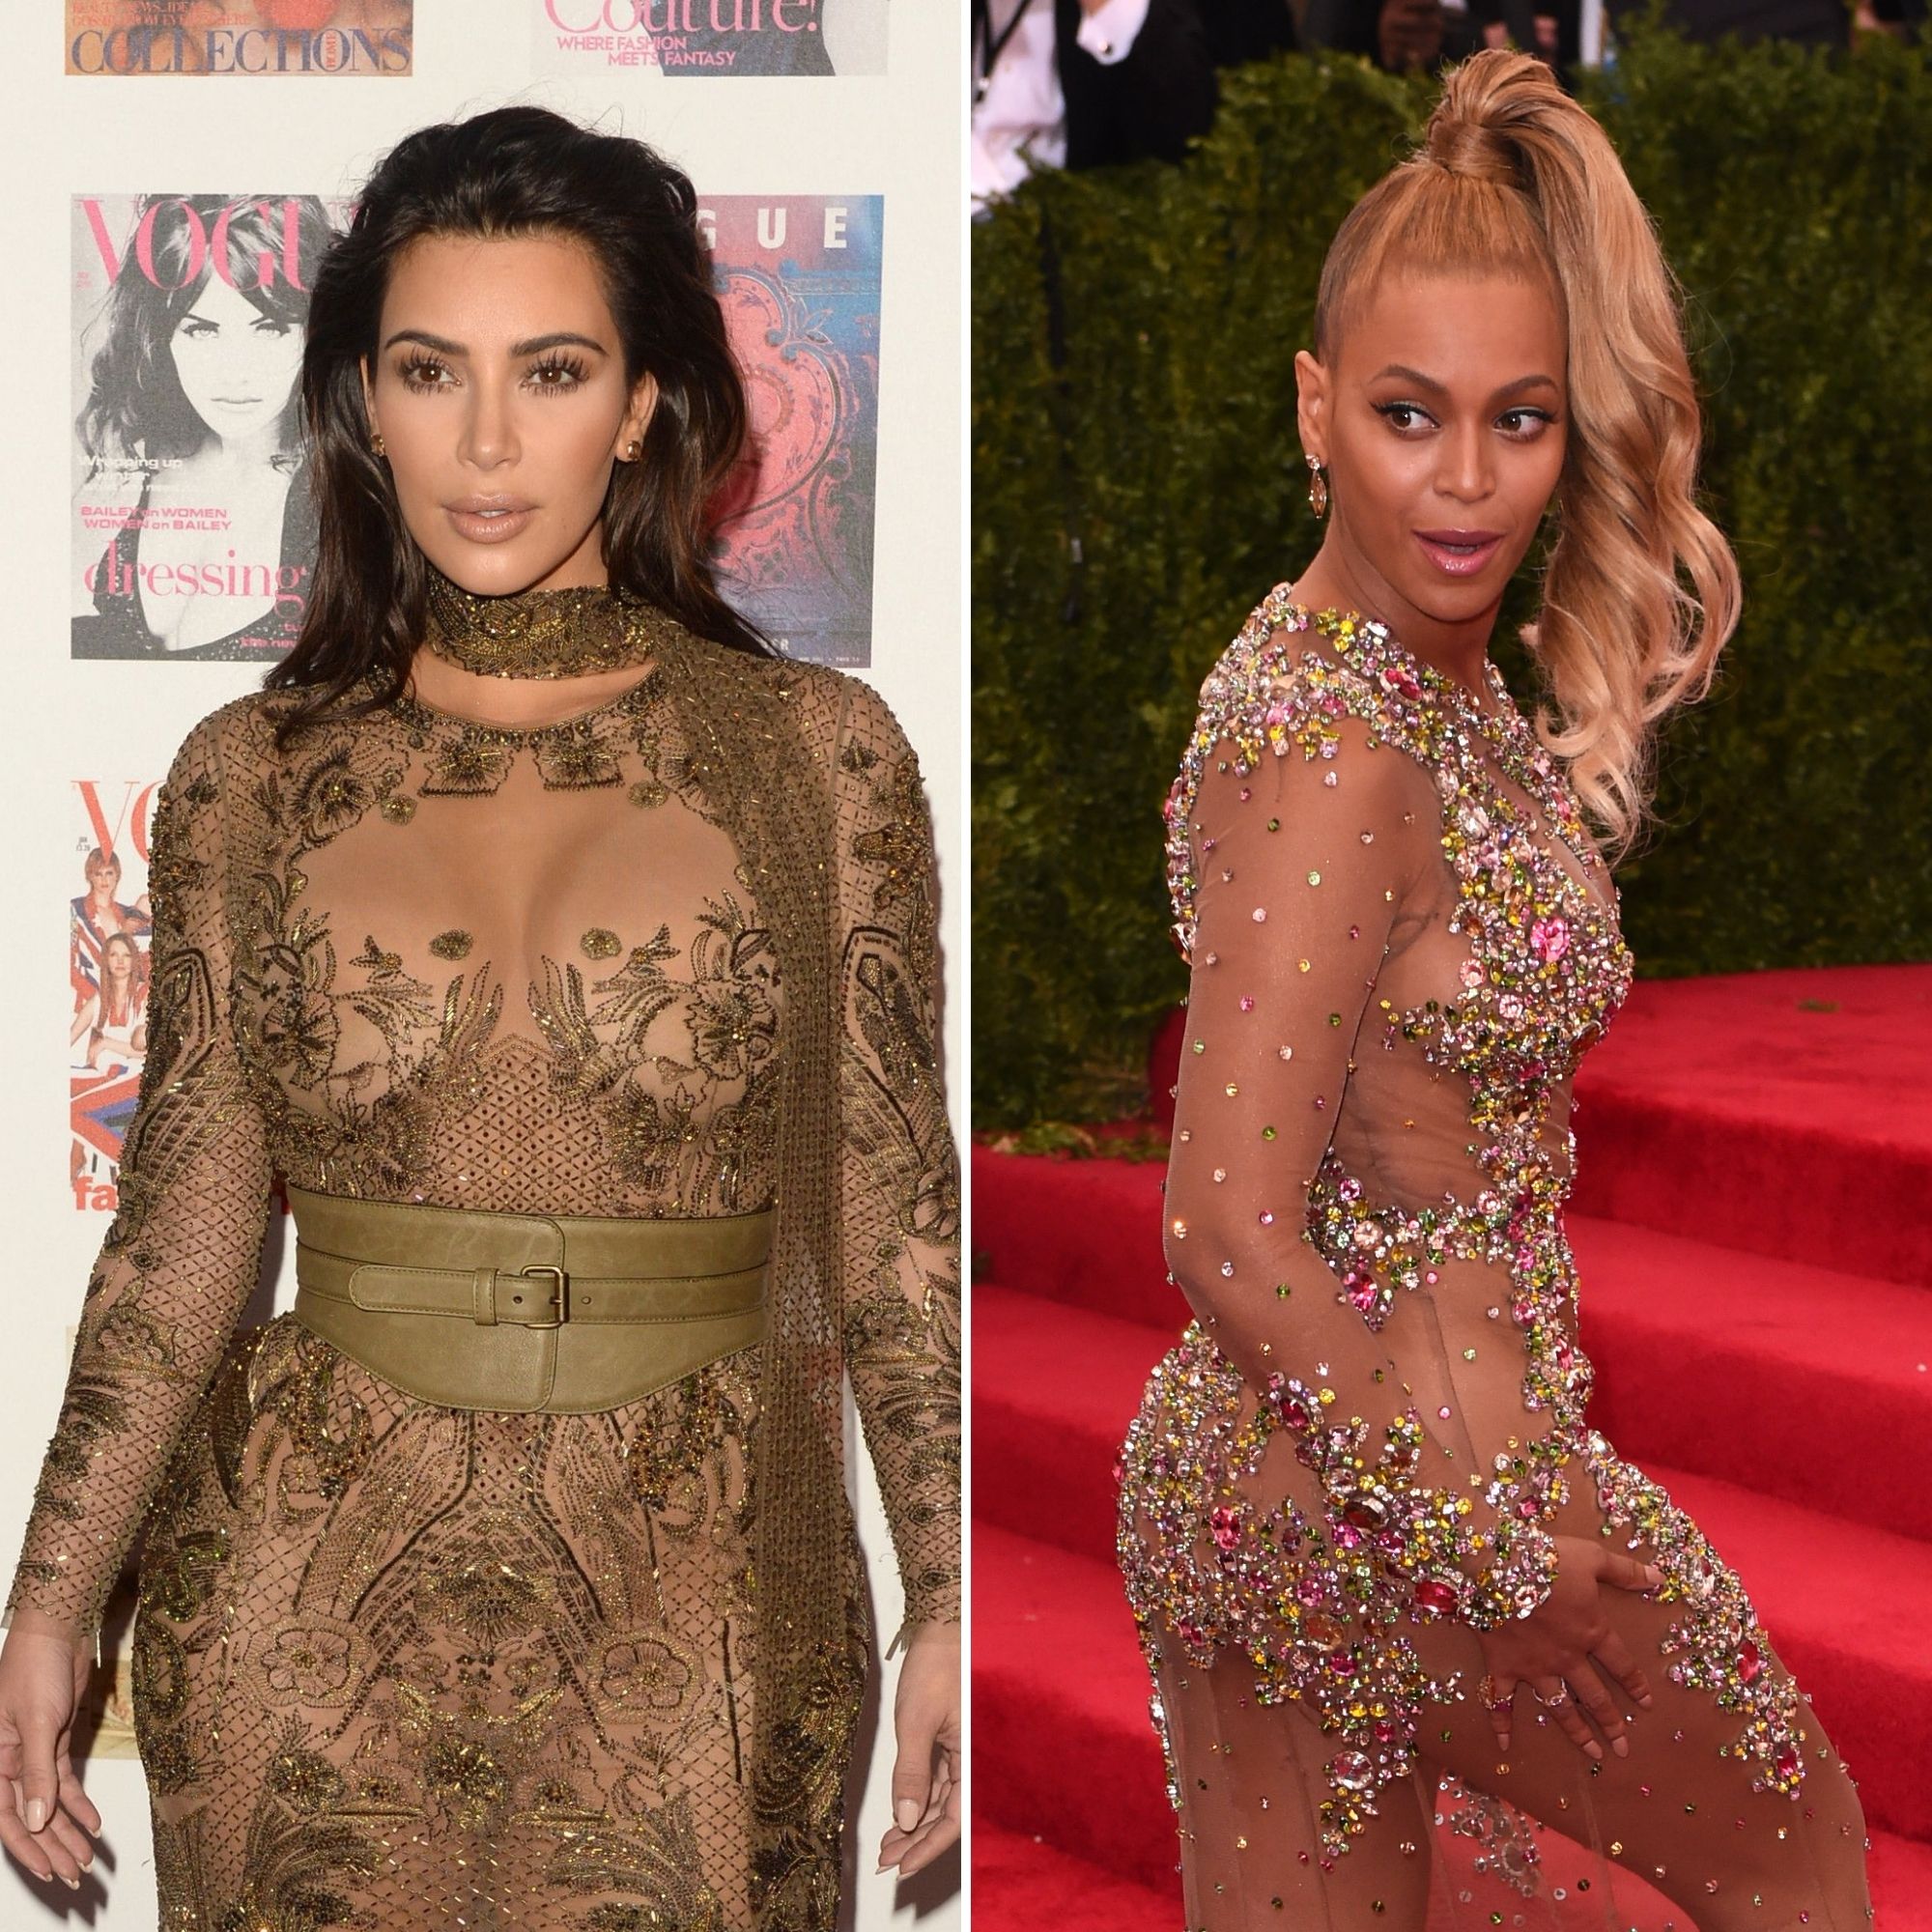 Celebrities Wearing Sheer, See-Through Outfits: Photos